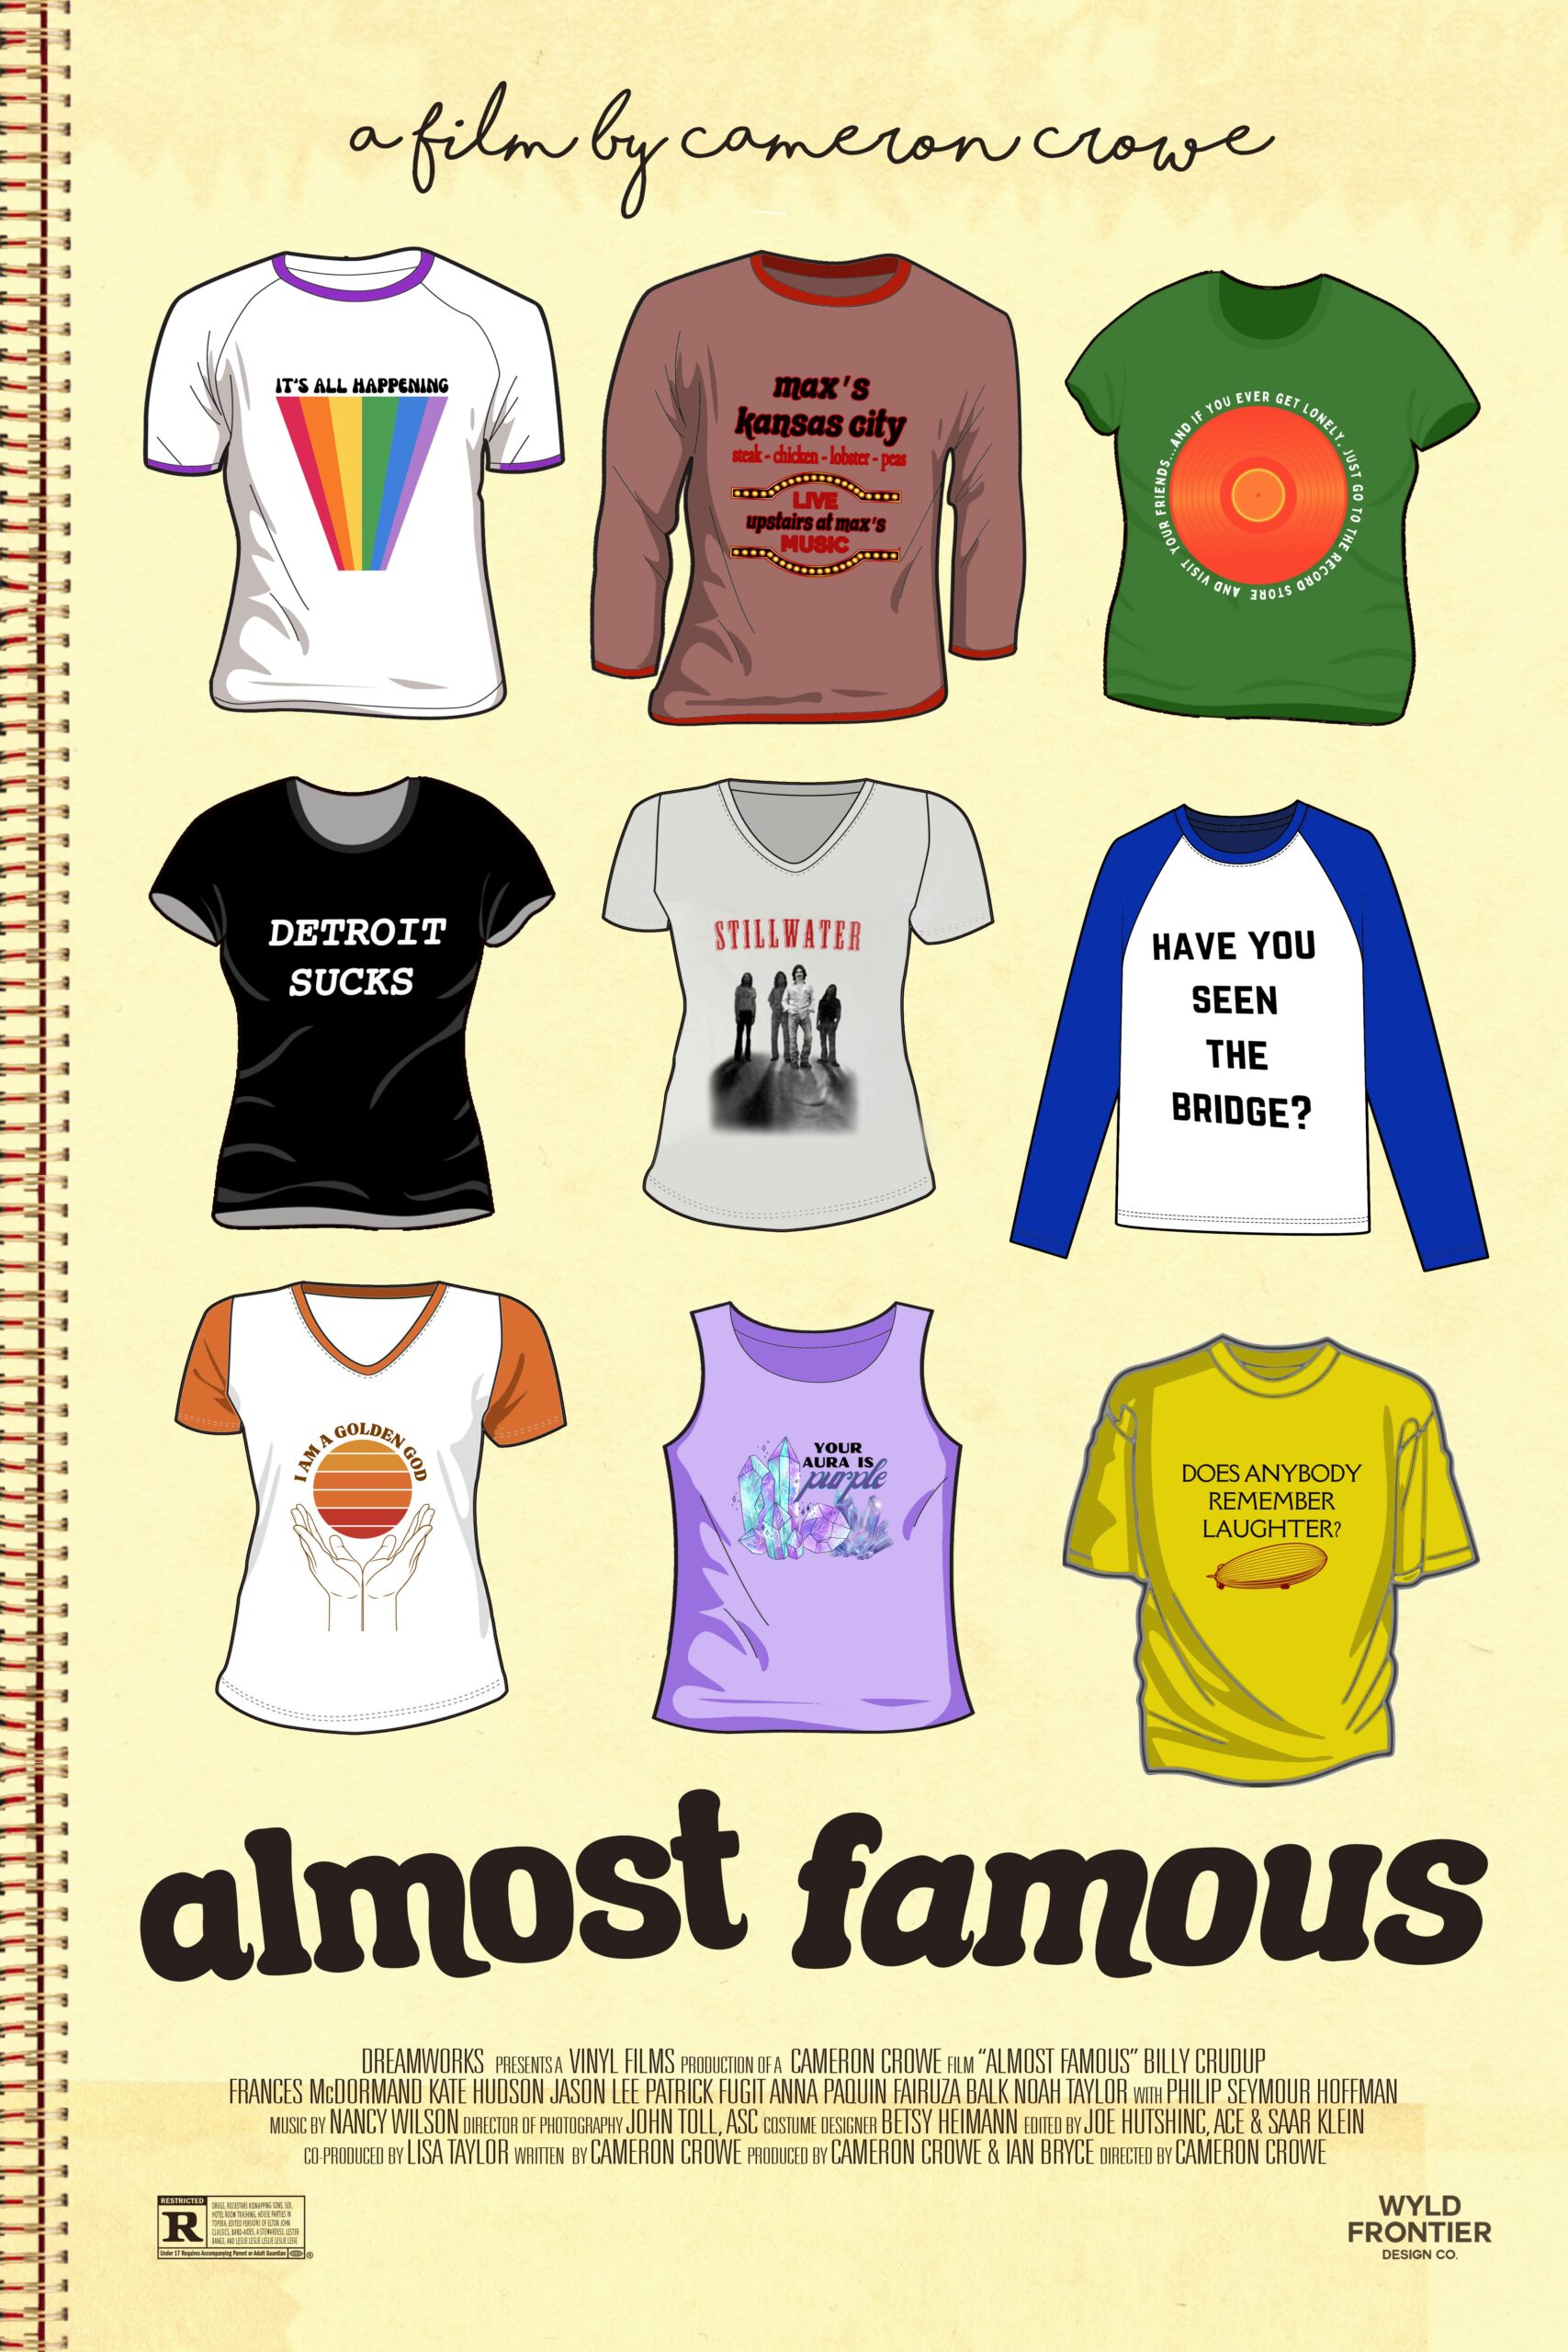 Almost Famous: Cool T-shirt